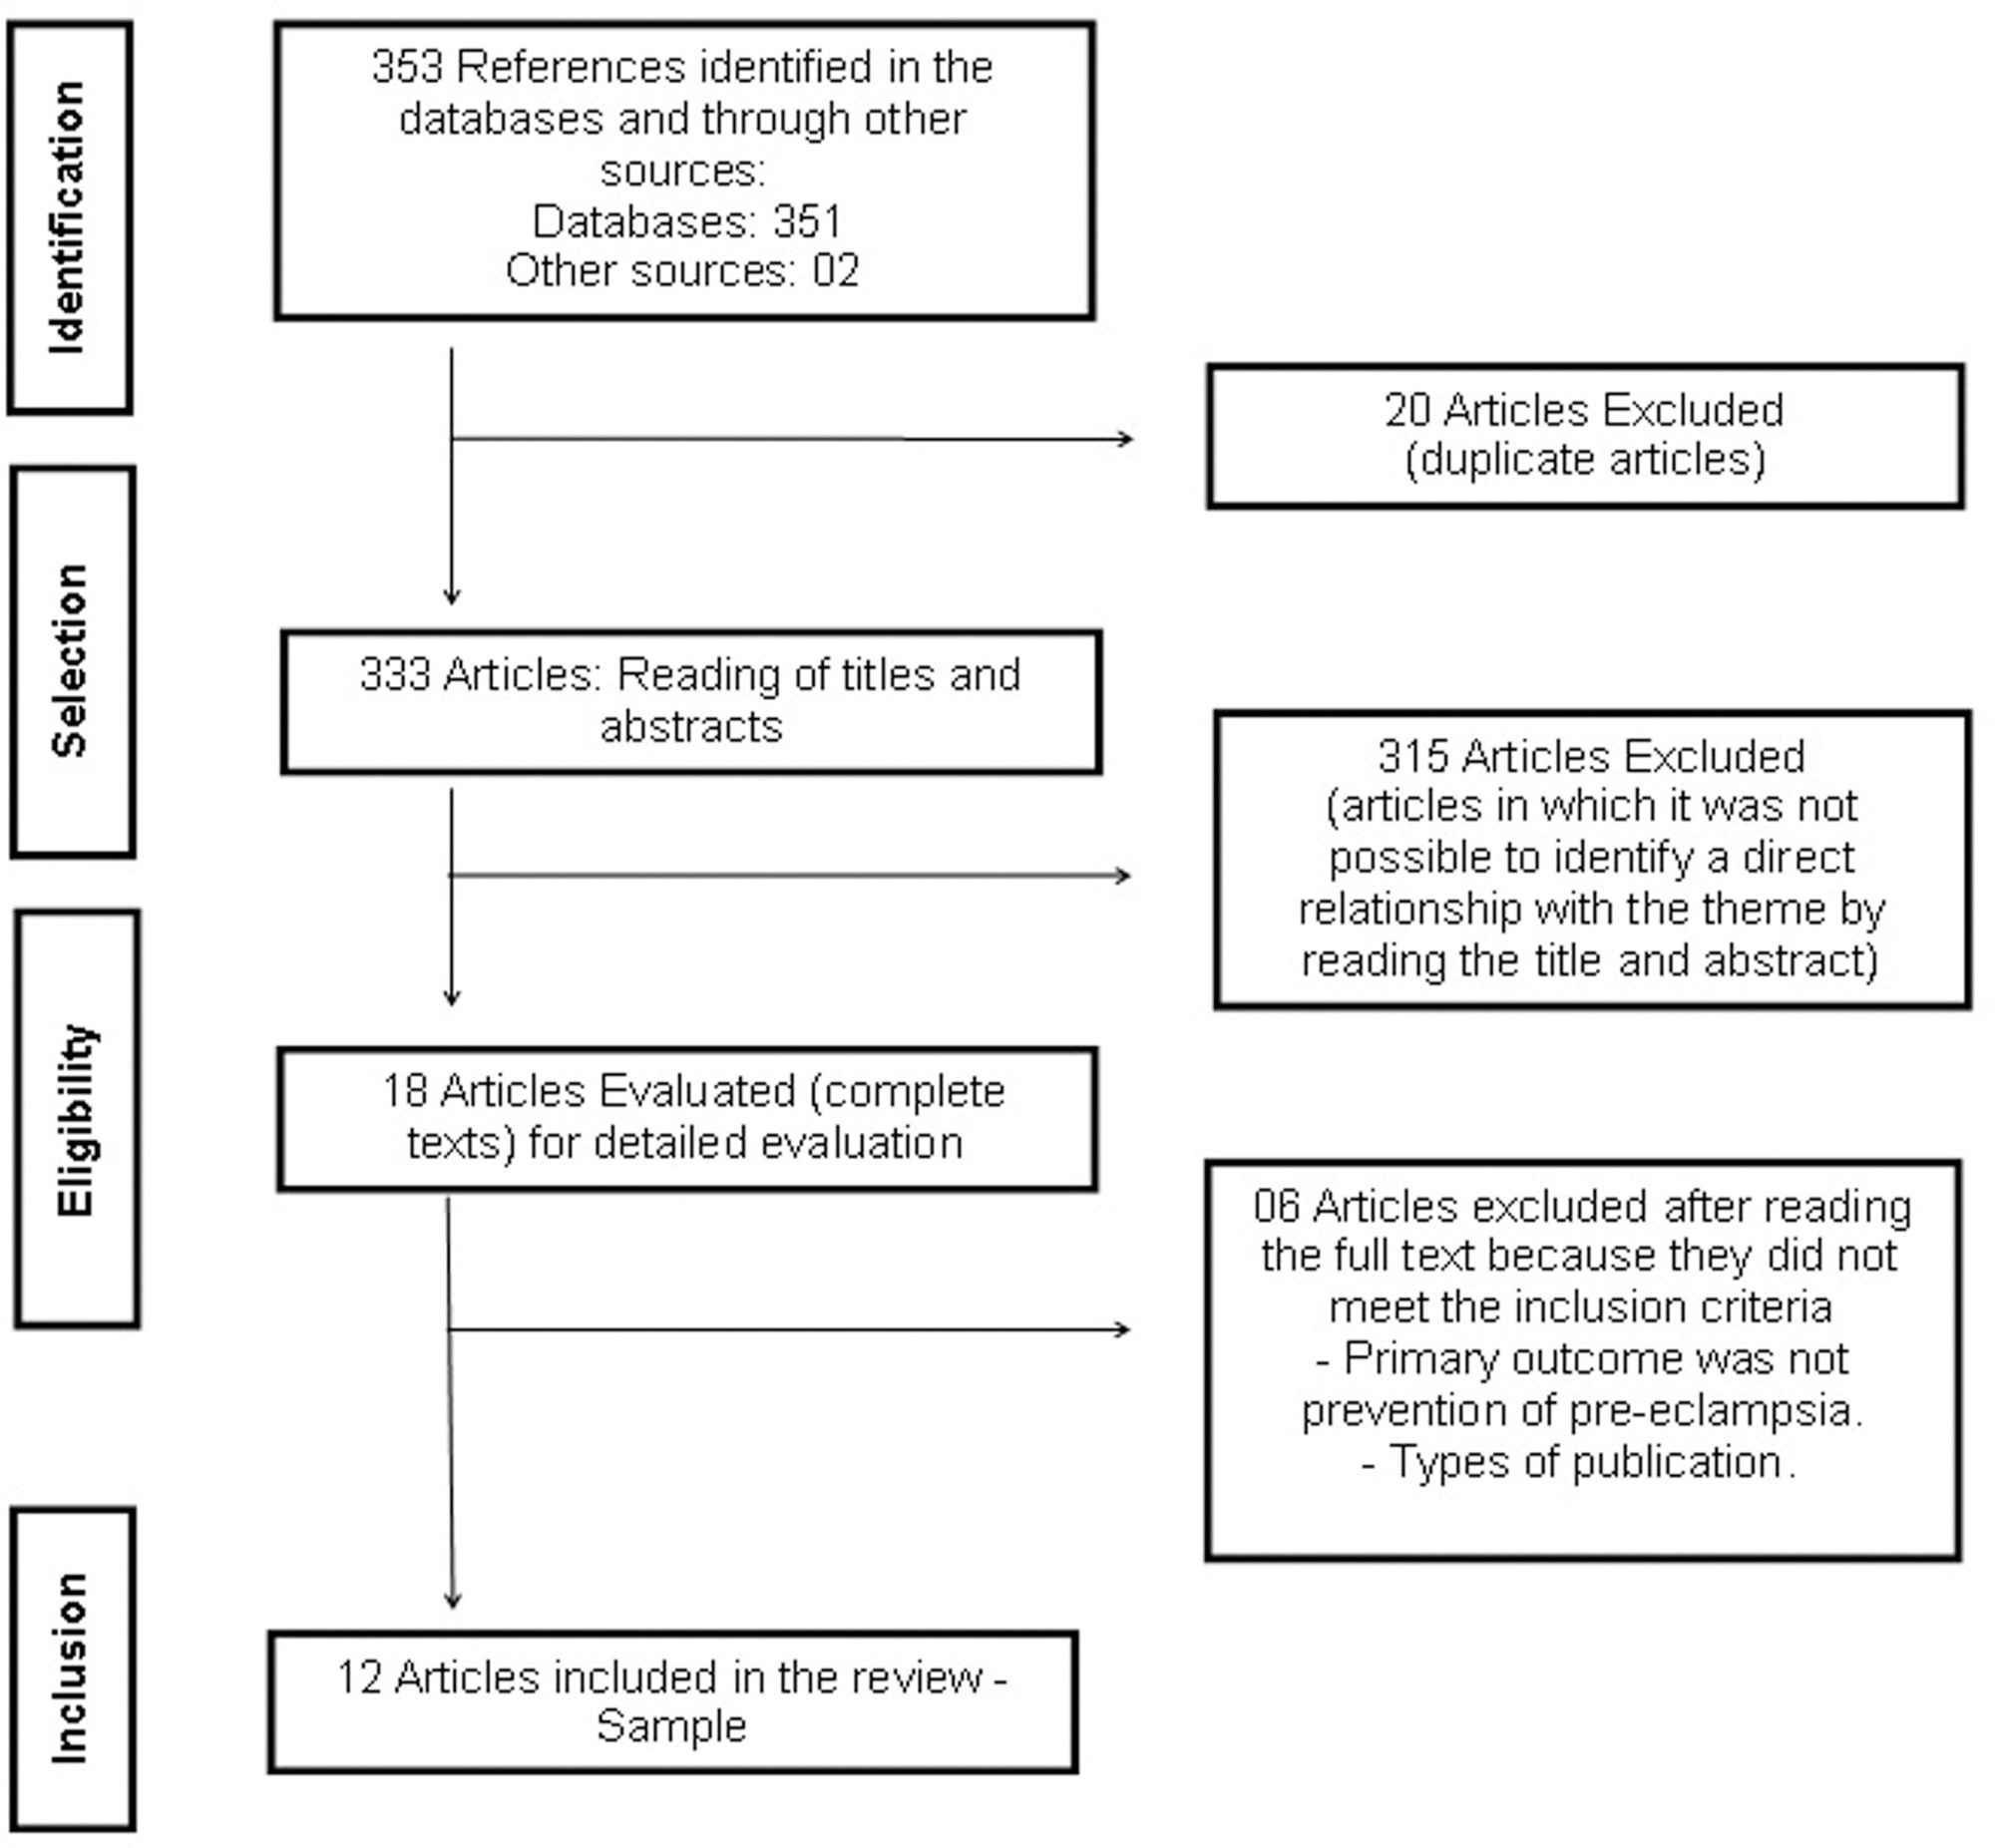 Clinical Procedures for the Prevention of Preeclampsia in Pregnant Women: A Systematic Review